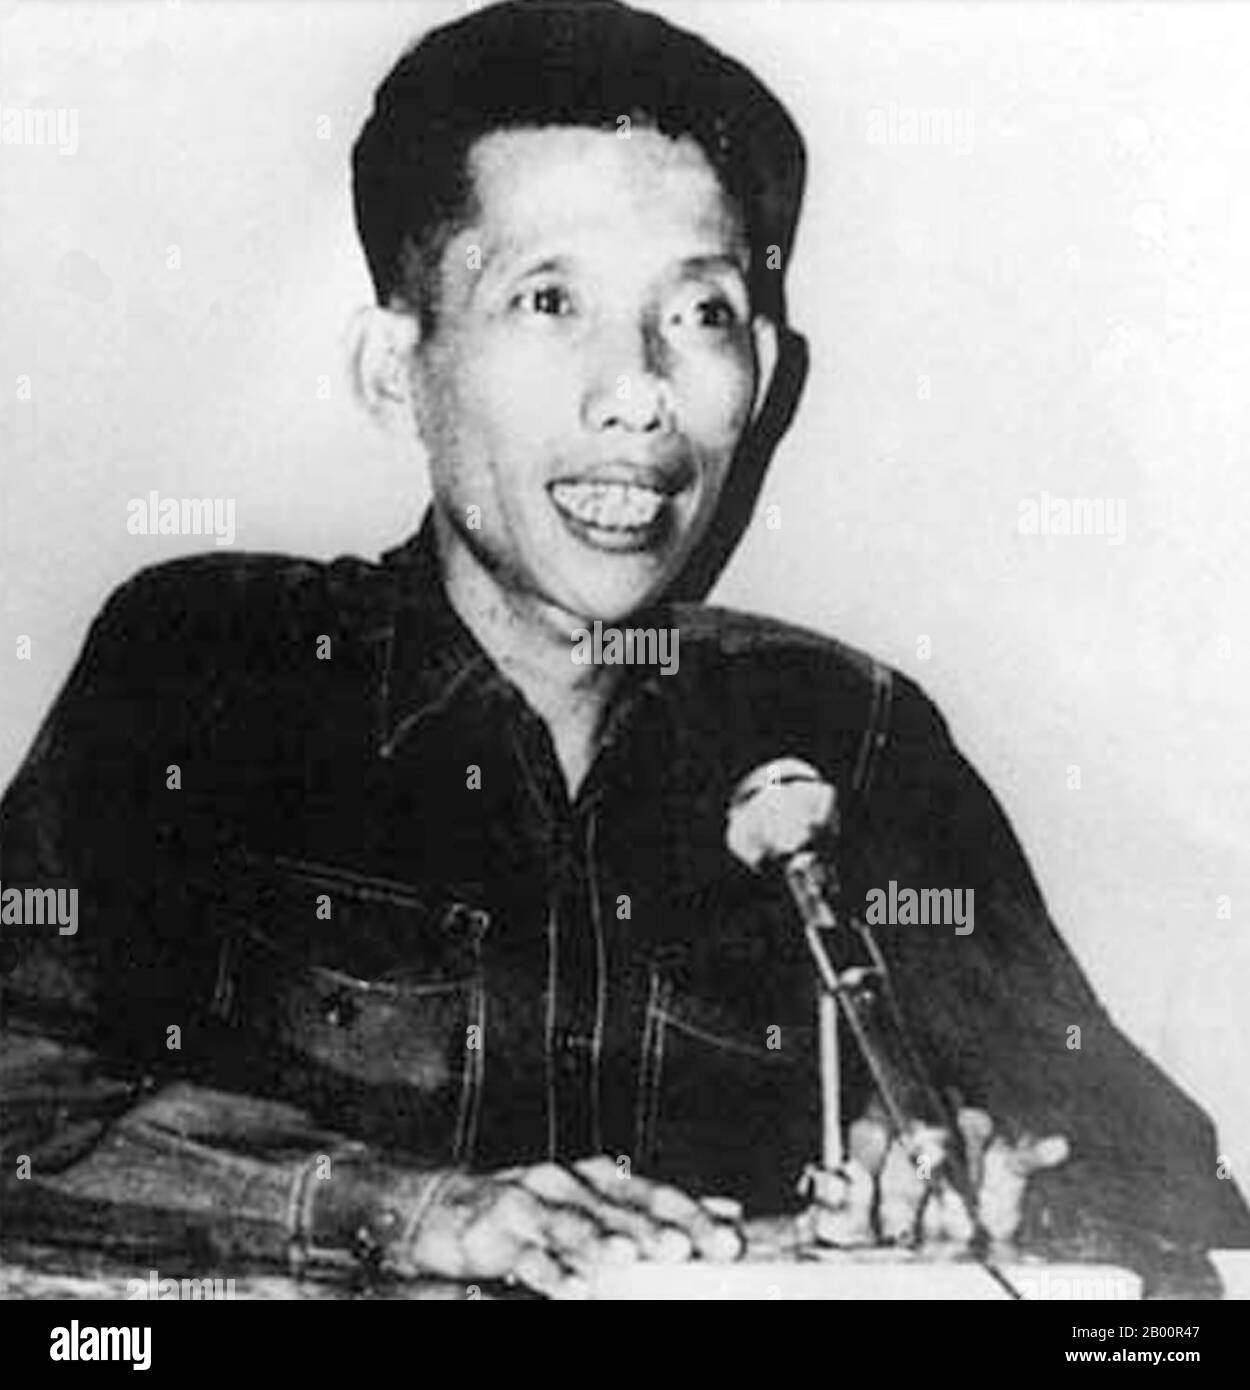 Cambodia: Kang Kek Iew (Comrade Duch) as director of Tuol Sleng (S 21) Prison, c.1976-8.  Kang Kek Iew or Kaing Kek Iev, Kaing Guek Eav (Comrade Duch or Deuch), a Sino-Khmer with the Chinese name Hang Pin, was born 17 November 1942 in Choyaot village, Kampong Chen subdistrict, Kampong Thom Province. He is best known for heading the Khmer Rouge special branch (Santebal) and running the infamous Tuol Sleng (S-21) prison camp in Phnom Penh. He was the first Khmer Rouge leader to be tried and convicted by the Extraordinary Chambers in the Courts of Cambodia for the crimes of the regime. Stock Photo